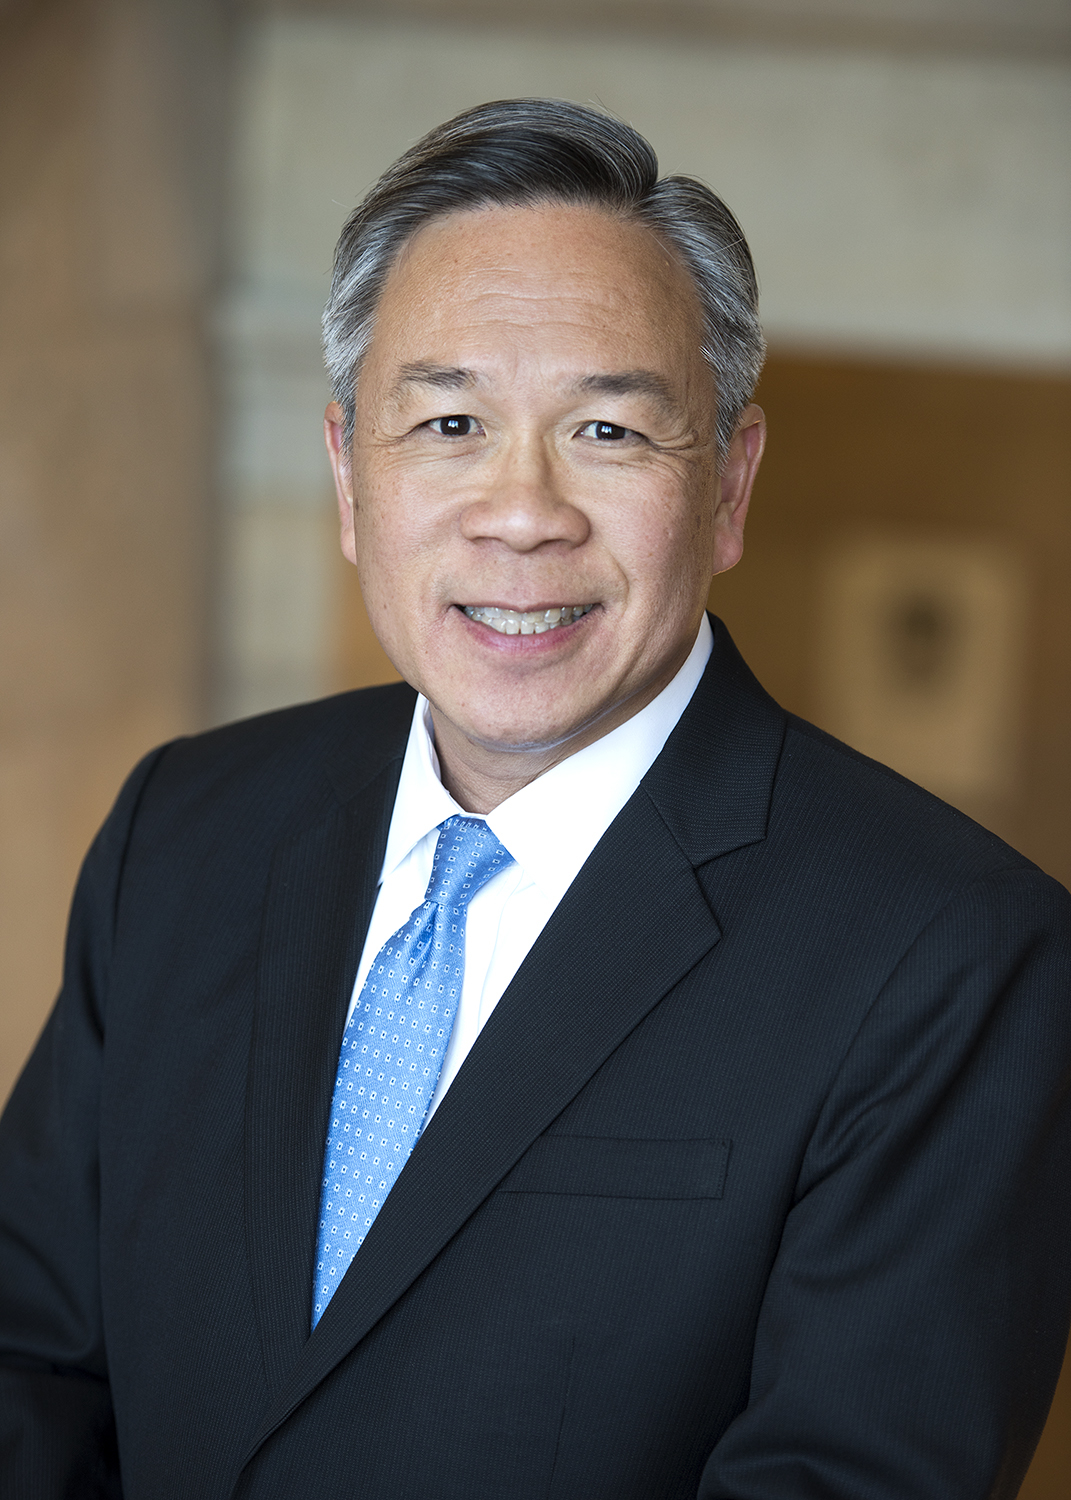 Michael P. Goh - Vice President for Equity and Diversity, University of Minnesota - 